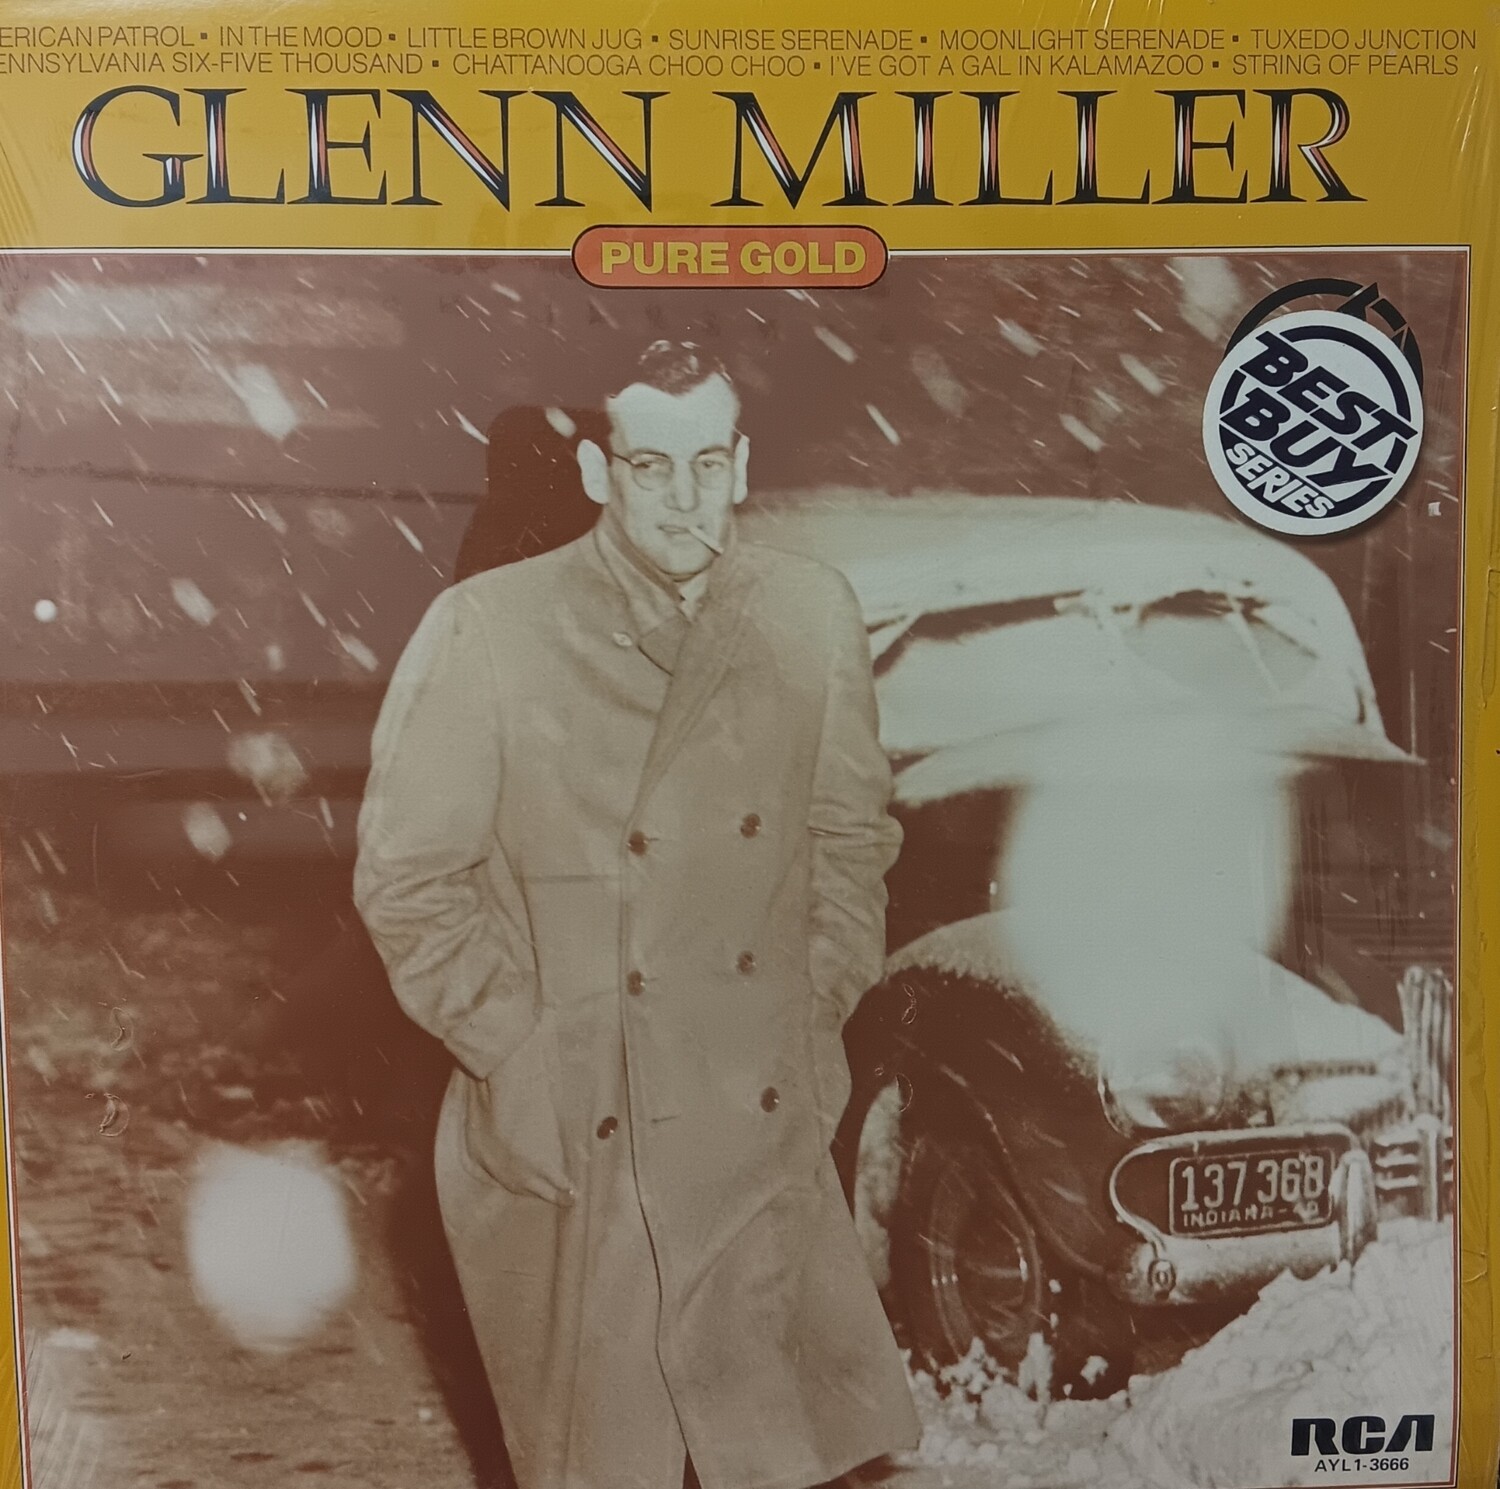 GLENN MILLER AND HOS ORCHESTRA - Pure Gold